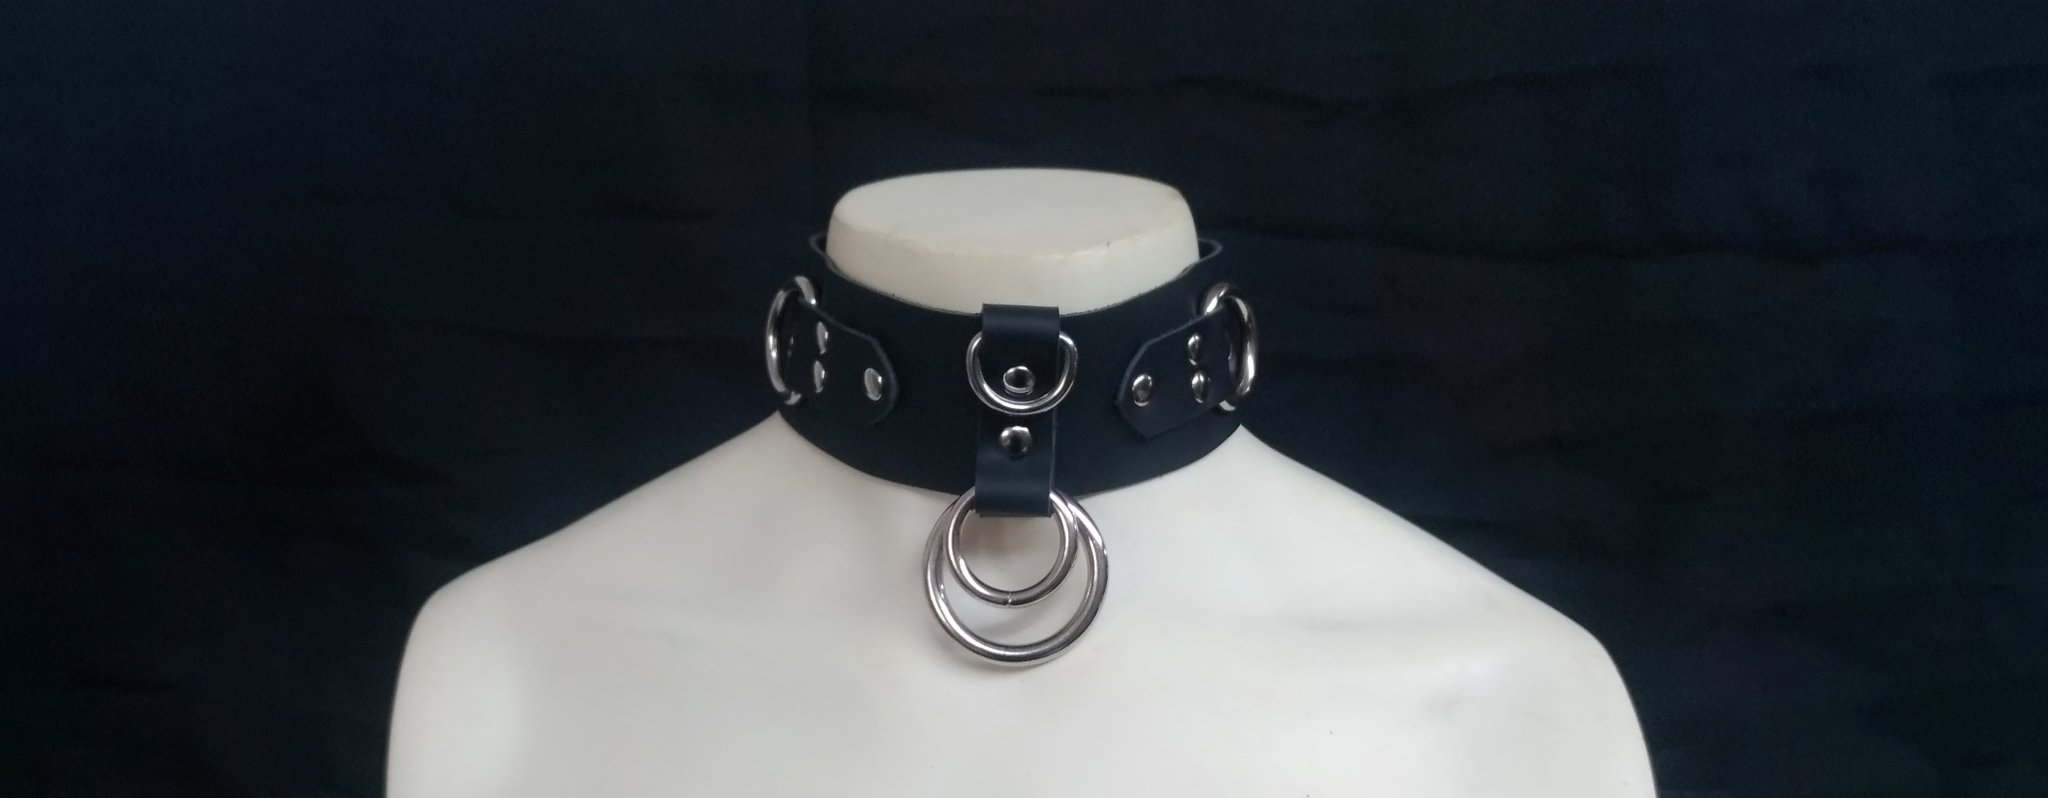 Puppy Play 101:  A Deep Dive Into Human-Puppy Collars - JetPup